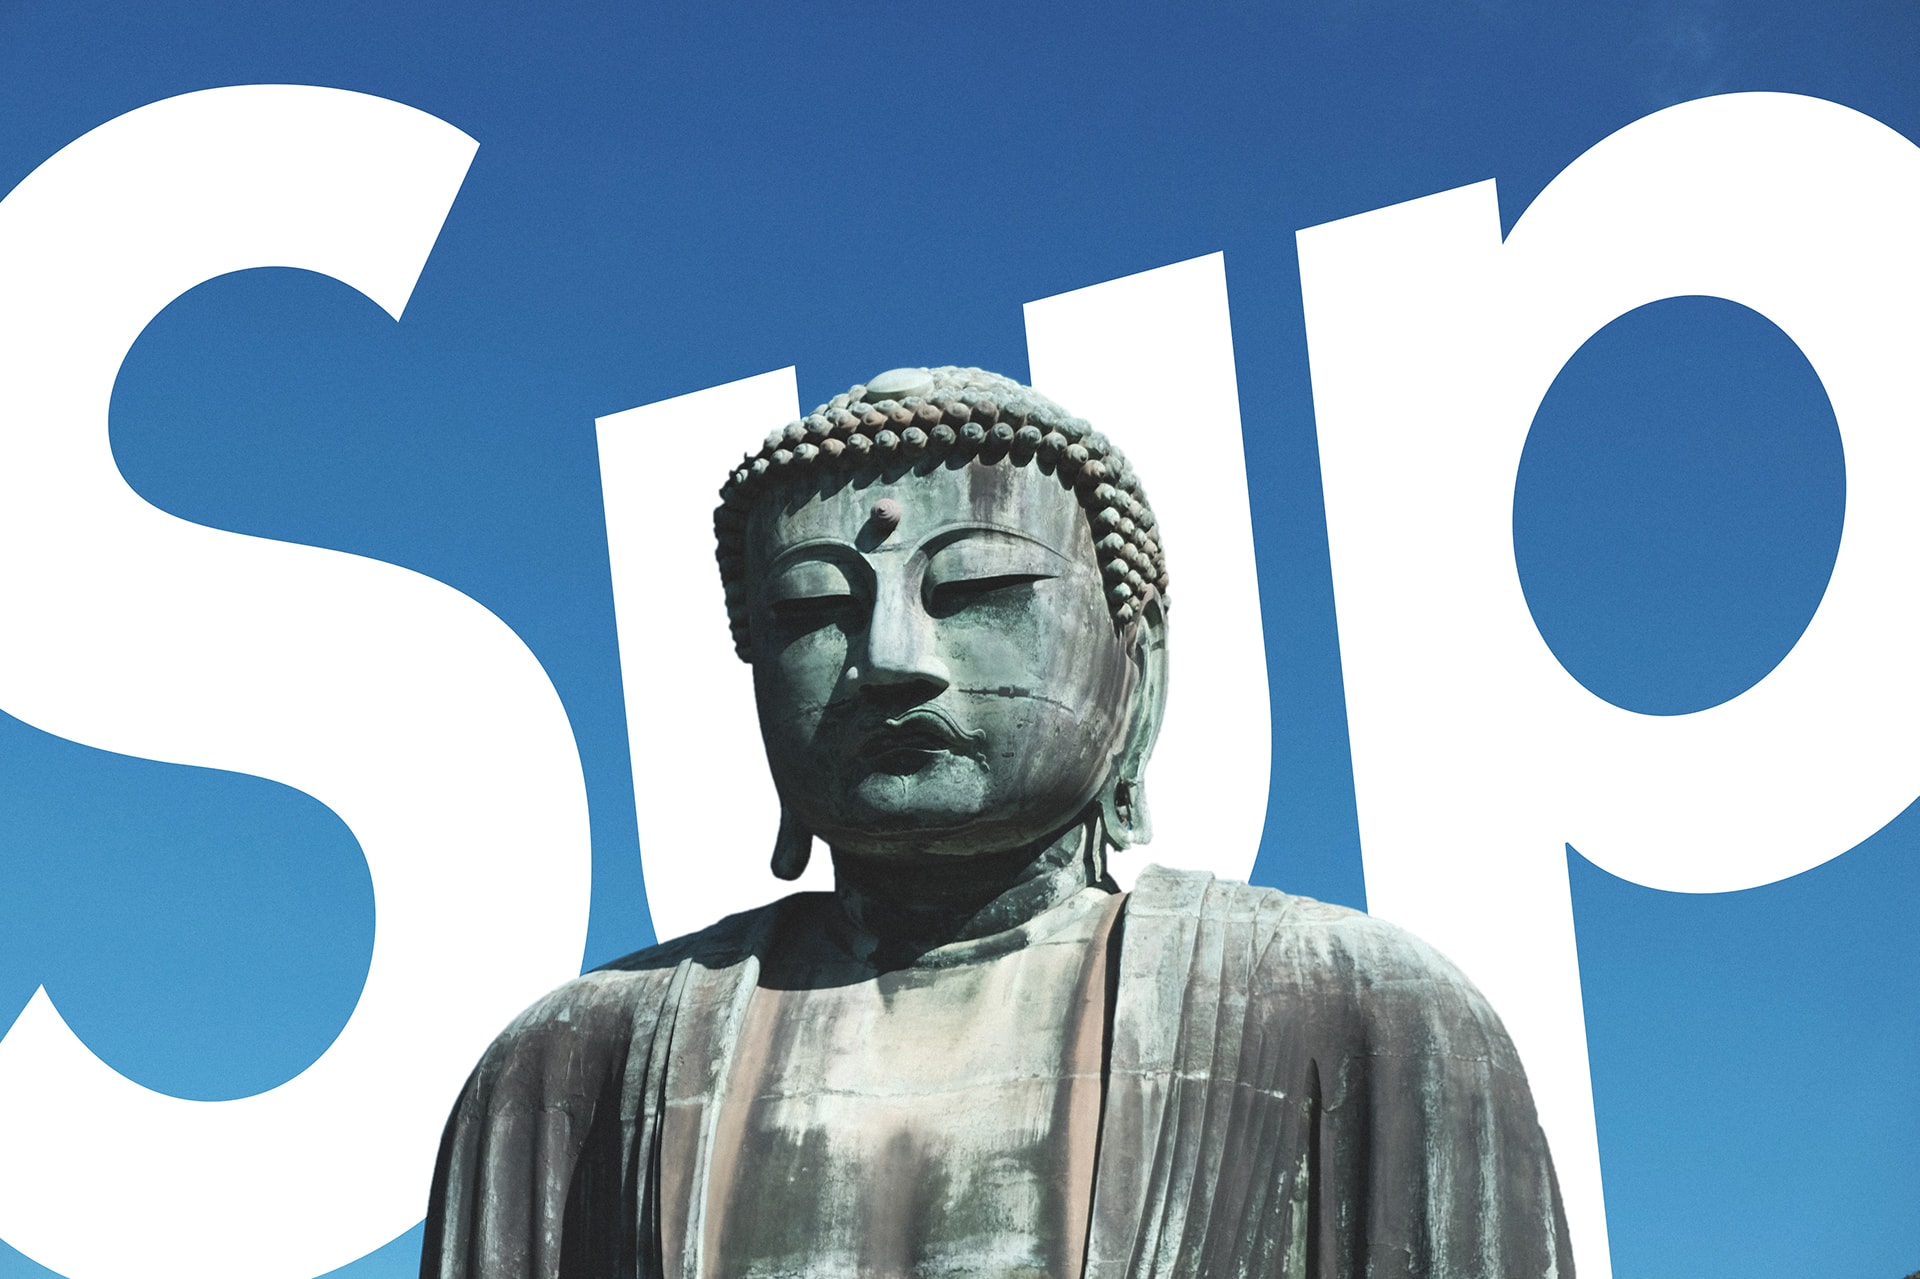 Art picture of a buddha statue in front of a blue sky